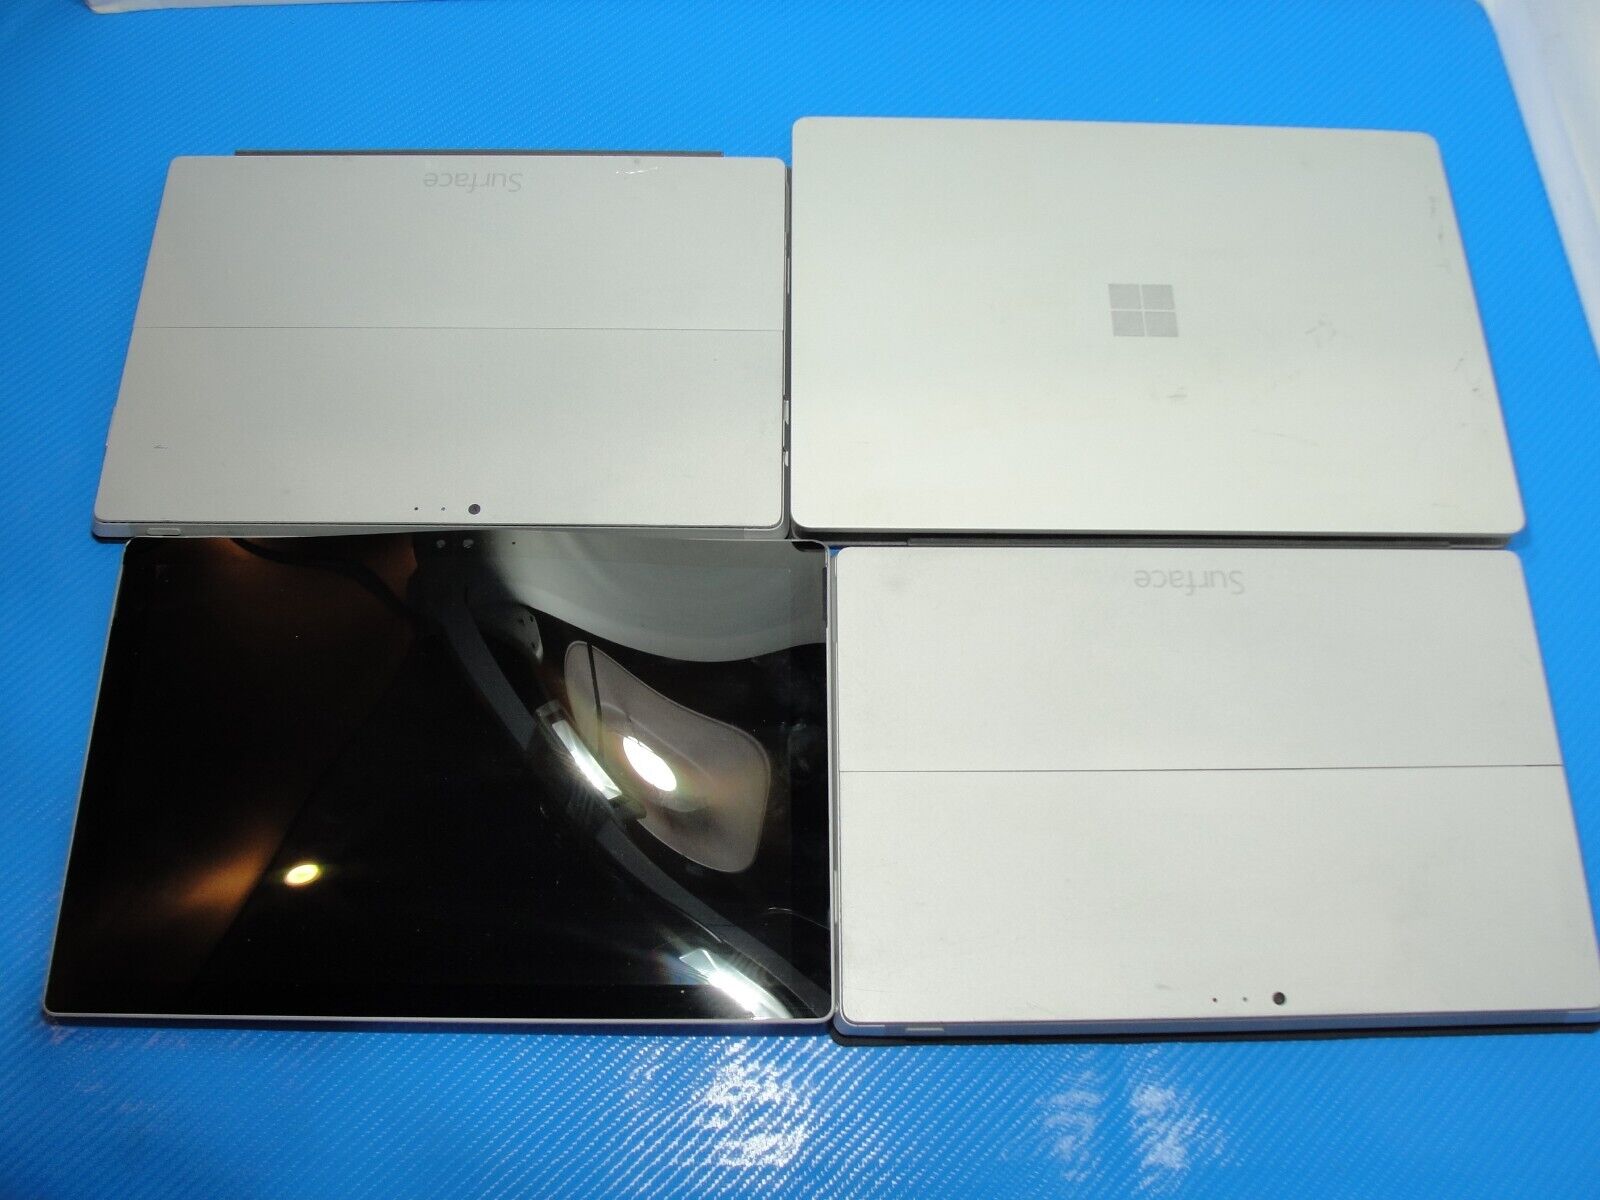 Mixed lot bundle of Surface devices, Pro 3/4/laptop, AS IS for parts or repair